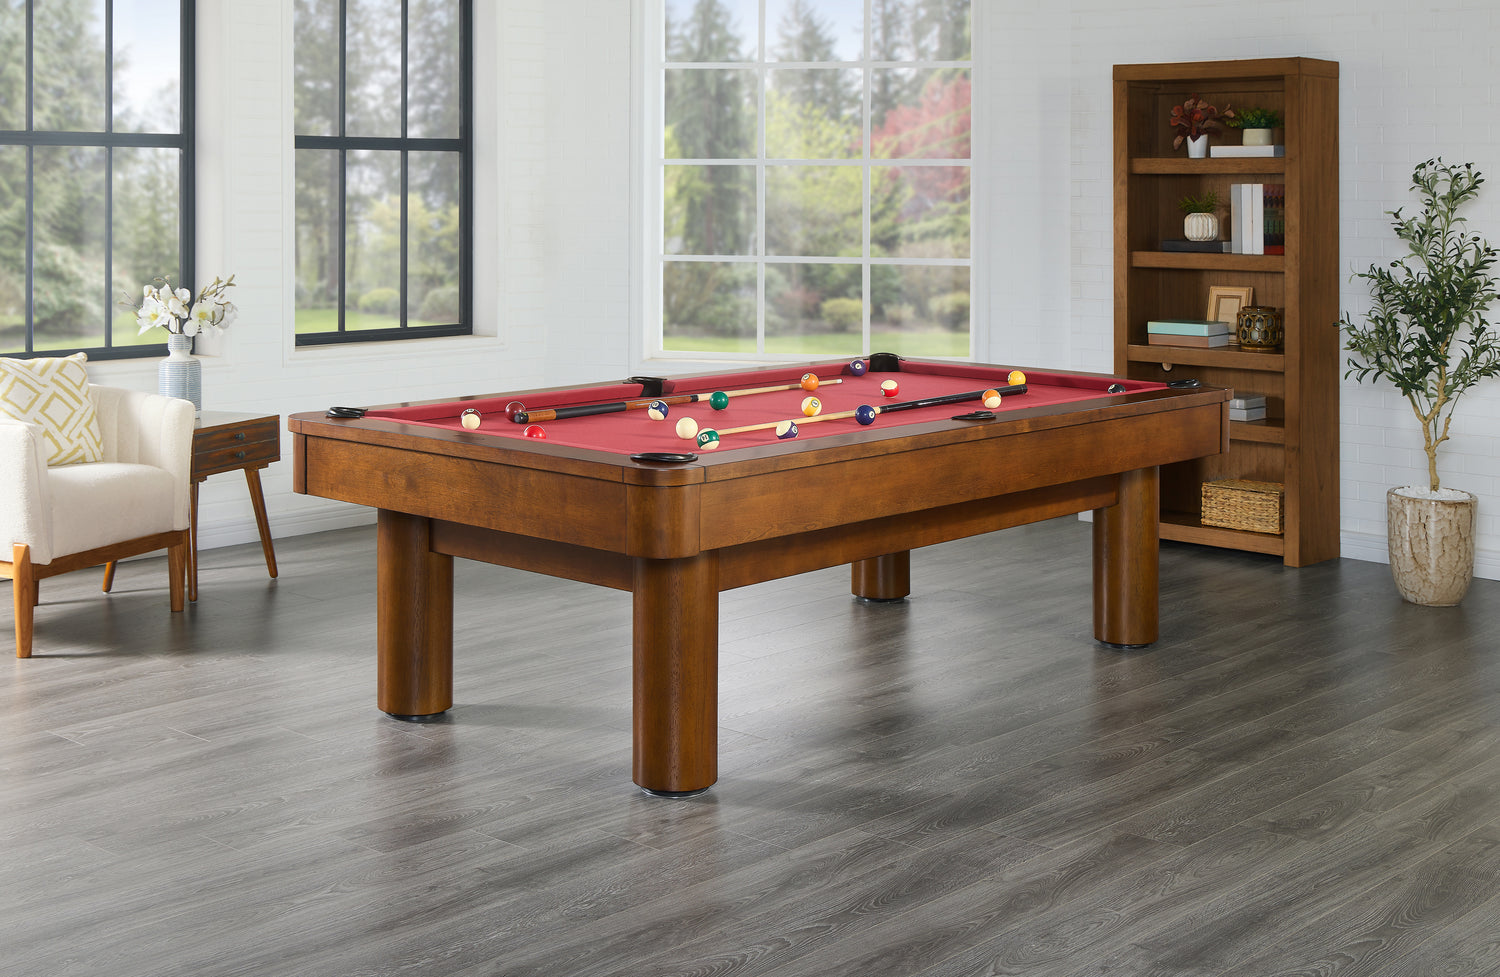 Legacy Billiards Dillard 7 Ft Pool Table in Walnut Finish with Red Cloth - Room Scene - Angle View